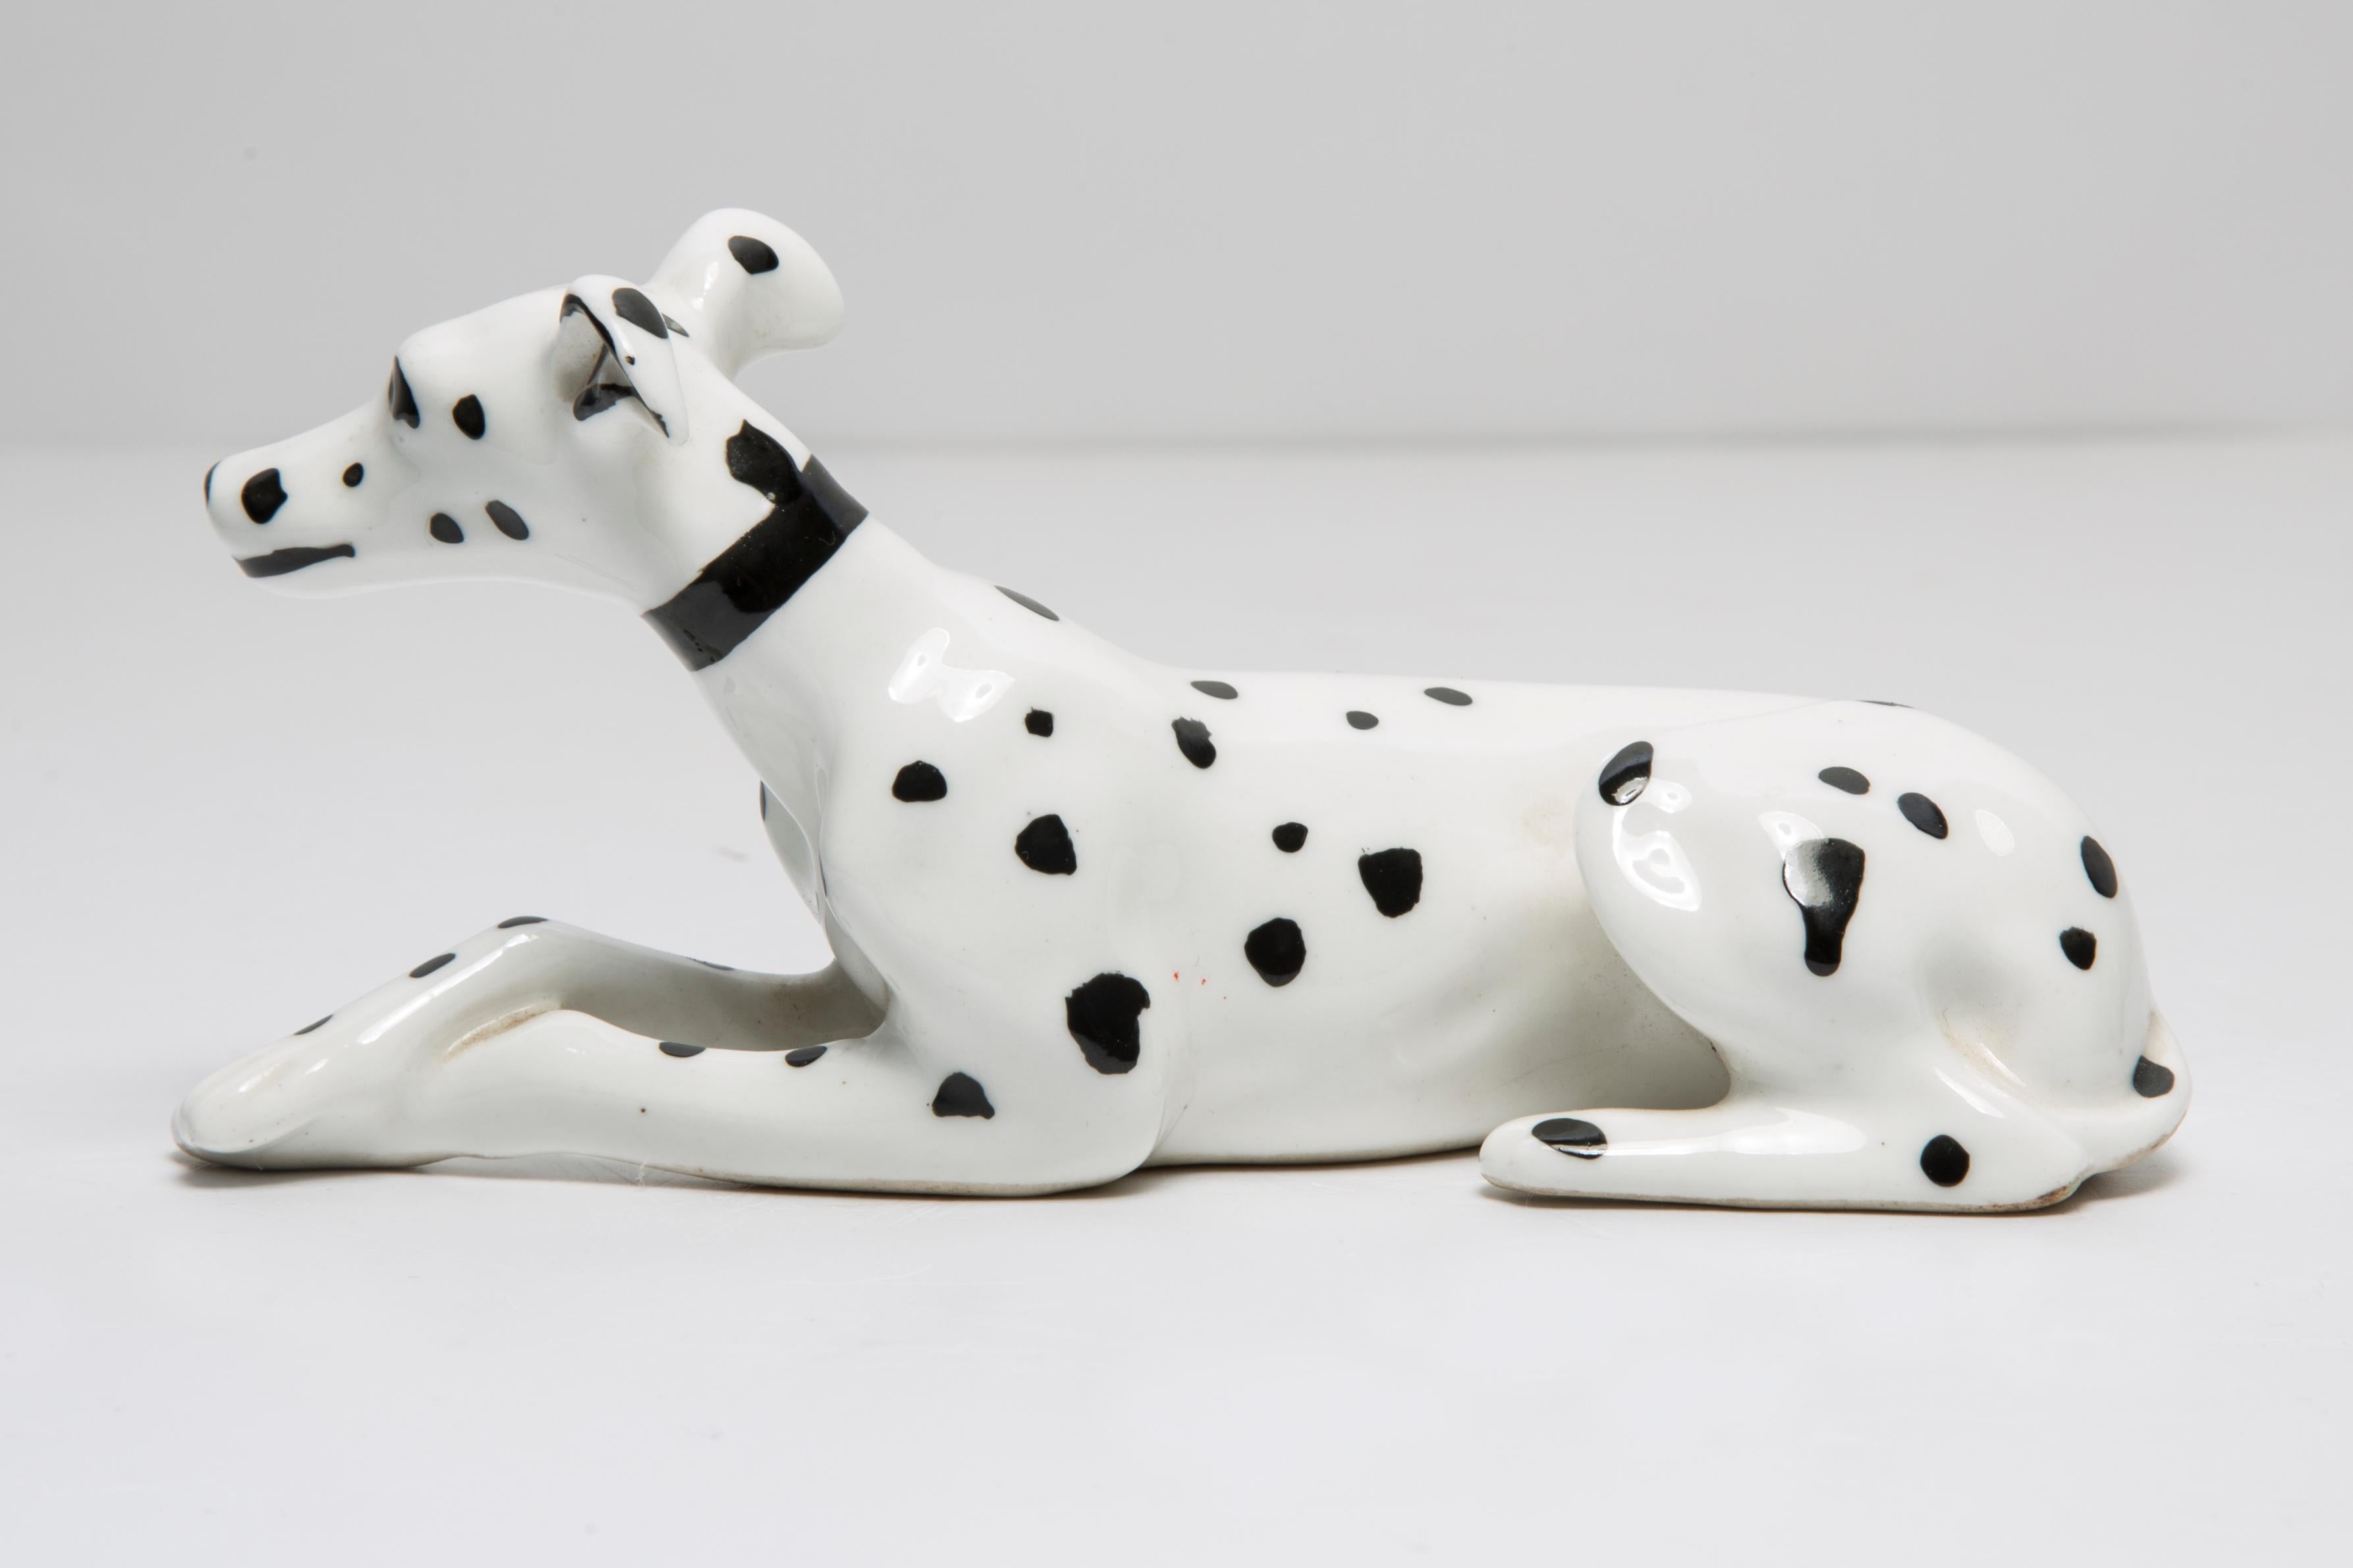 Painted ceramic, very good original vintage condition. No damages or cracks. Beautiful and unique decorative sculpture. Mini White Dalmatian Dog Sculpture was produced in Italy. Only one dog available.